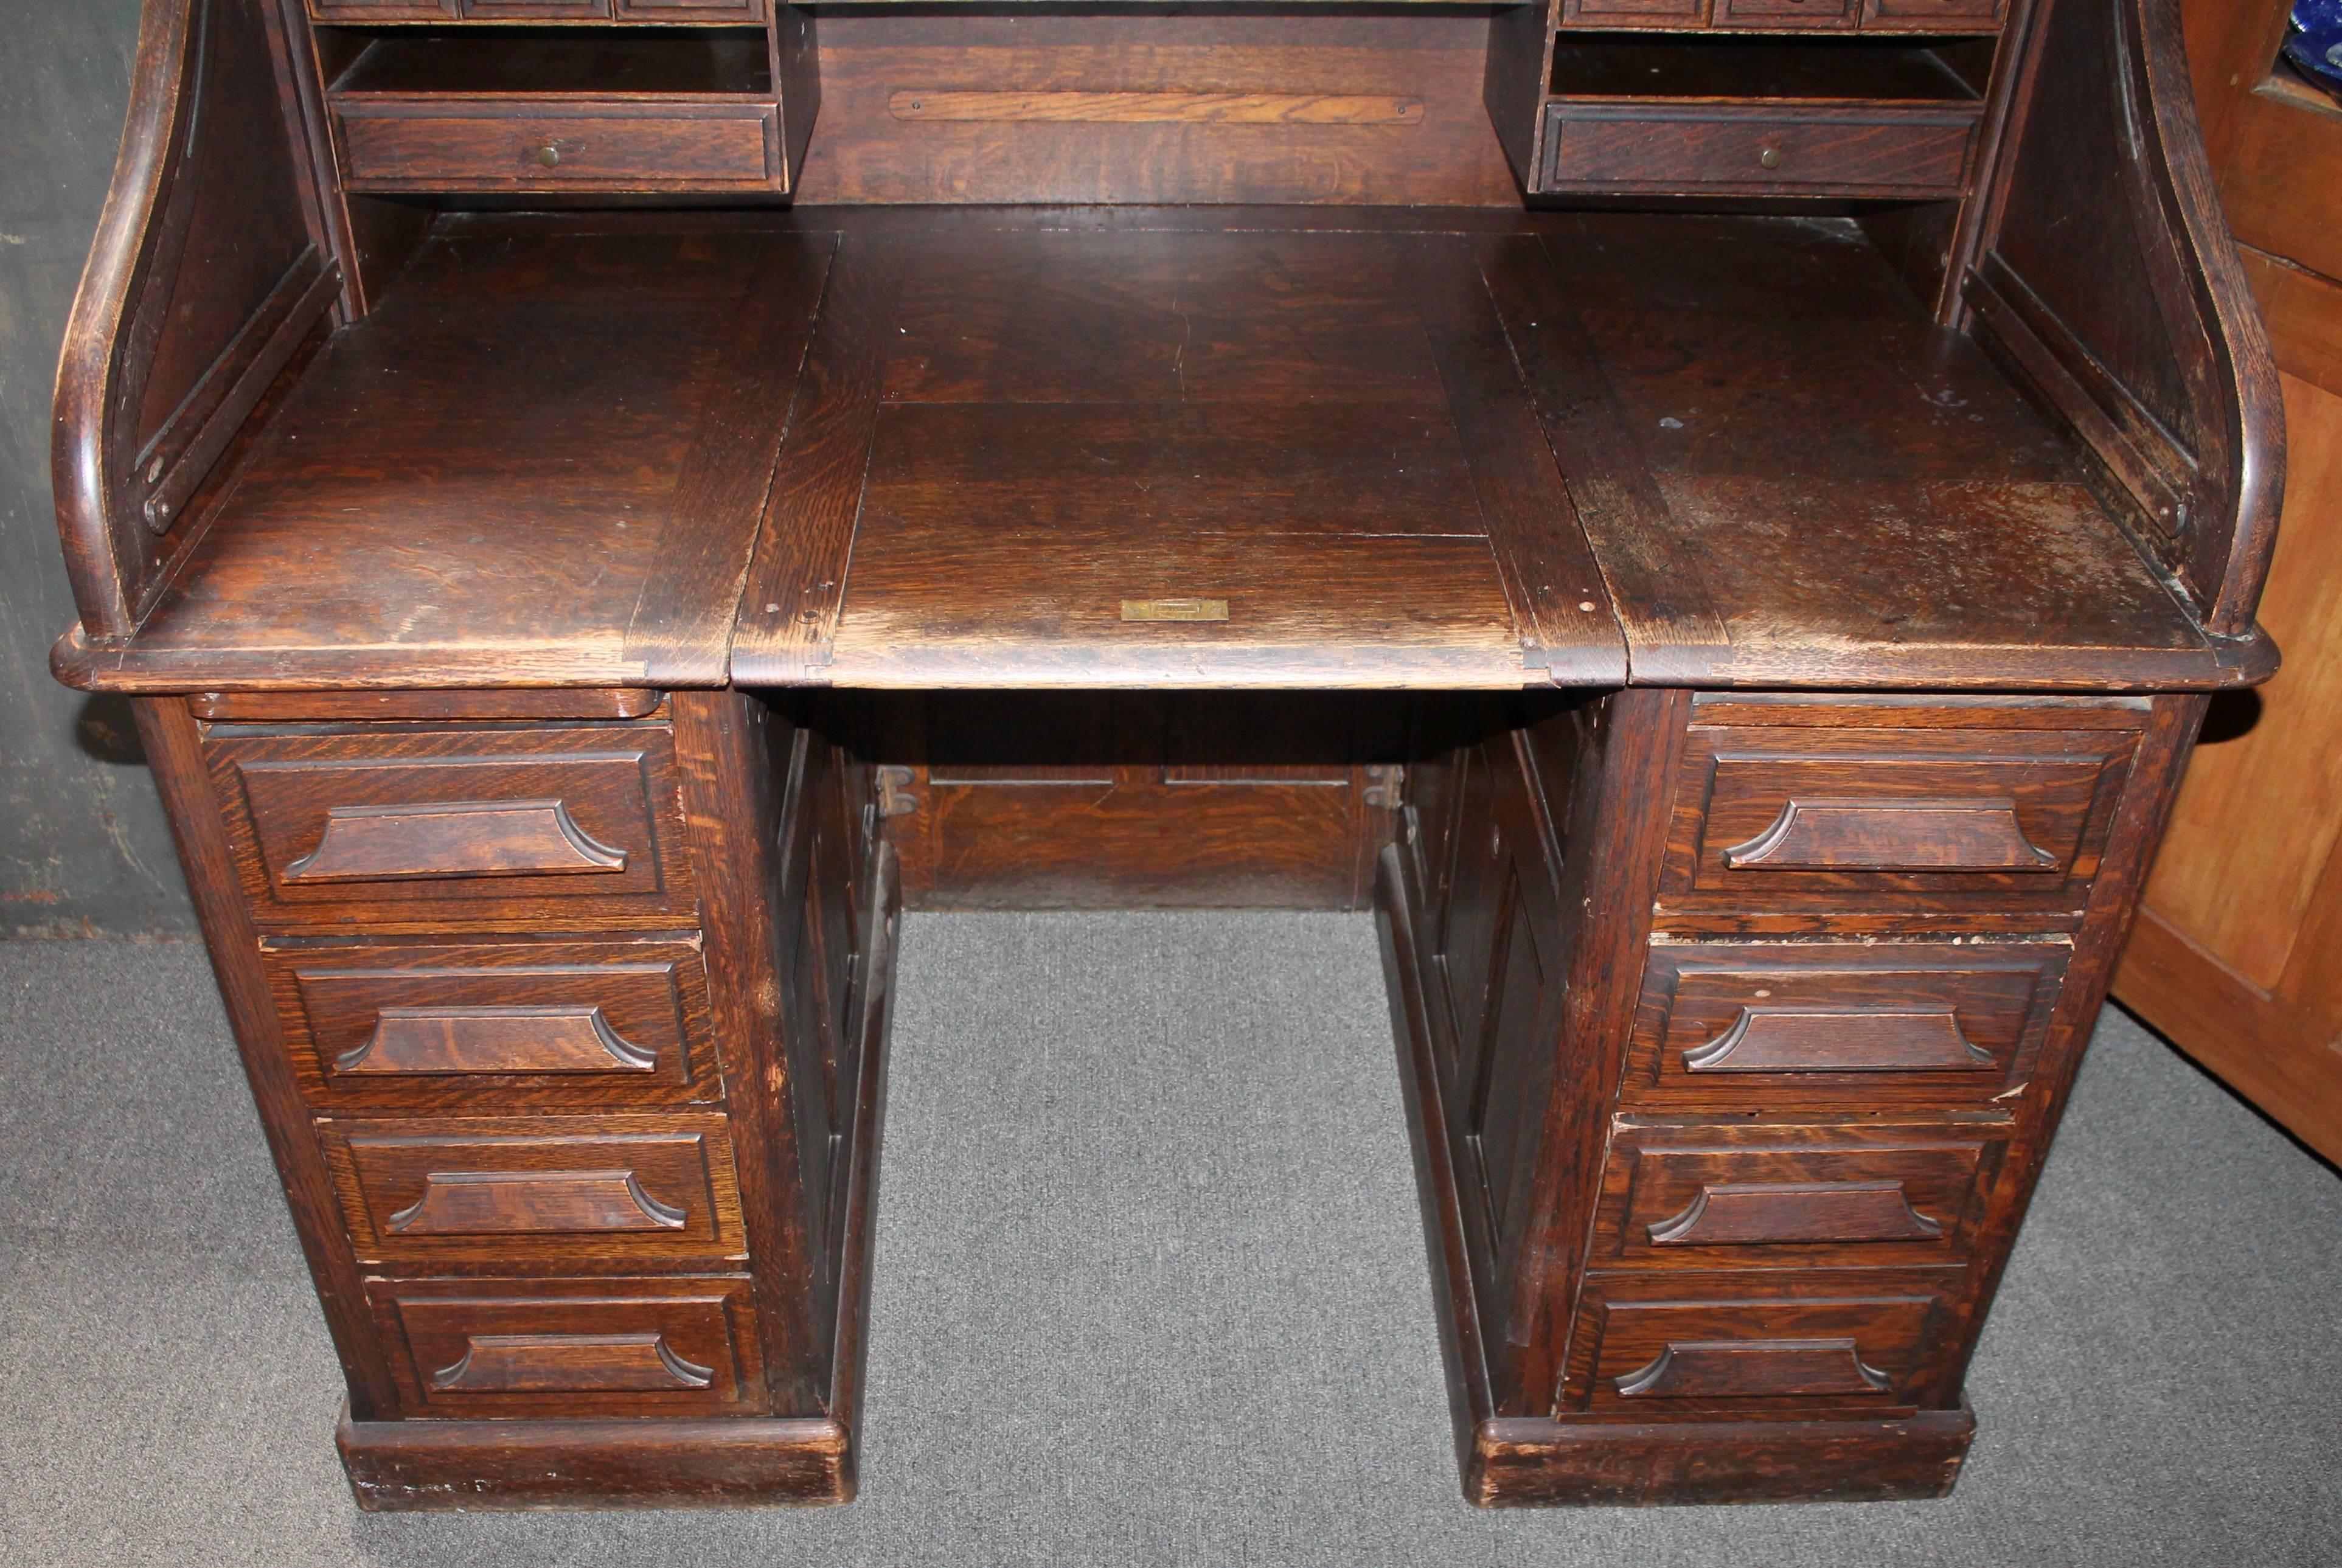 This amazing 19th century roll top desk was manufactured by the Gunn Furniture Company. established in the 1890's. This amazing roll top desk has and amazing patina with all original paint in mint condition. This item has all original parts. The